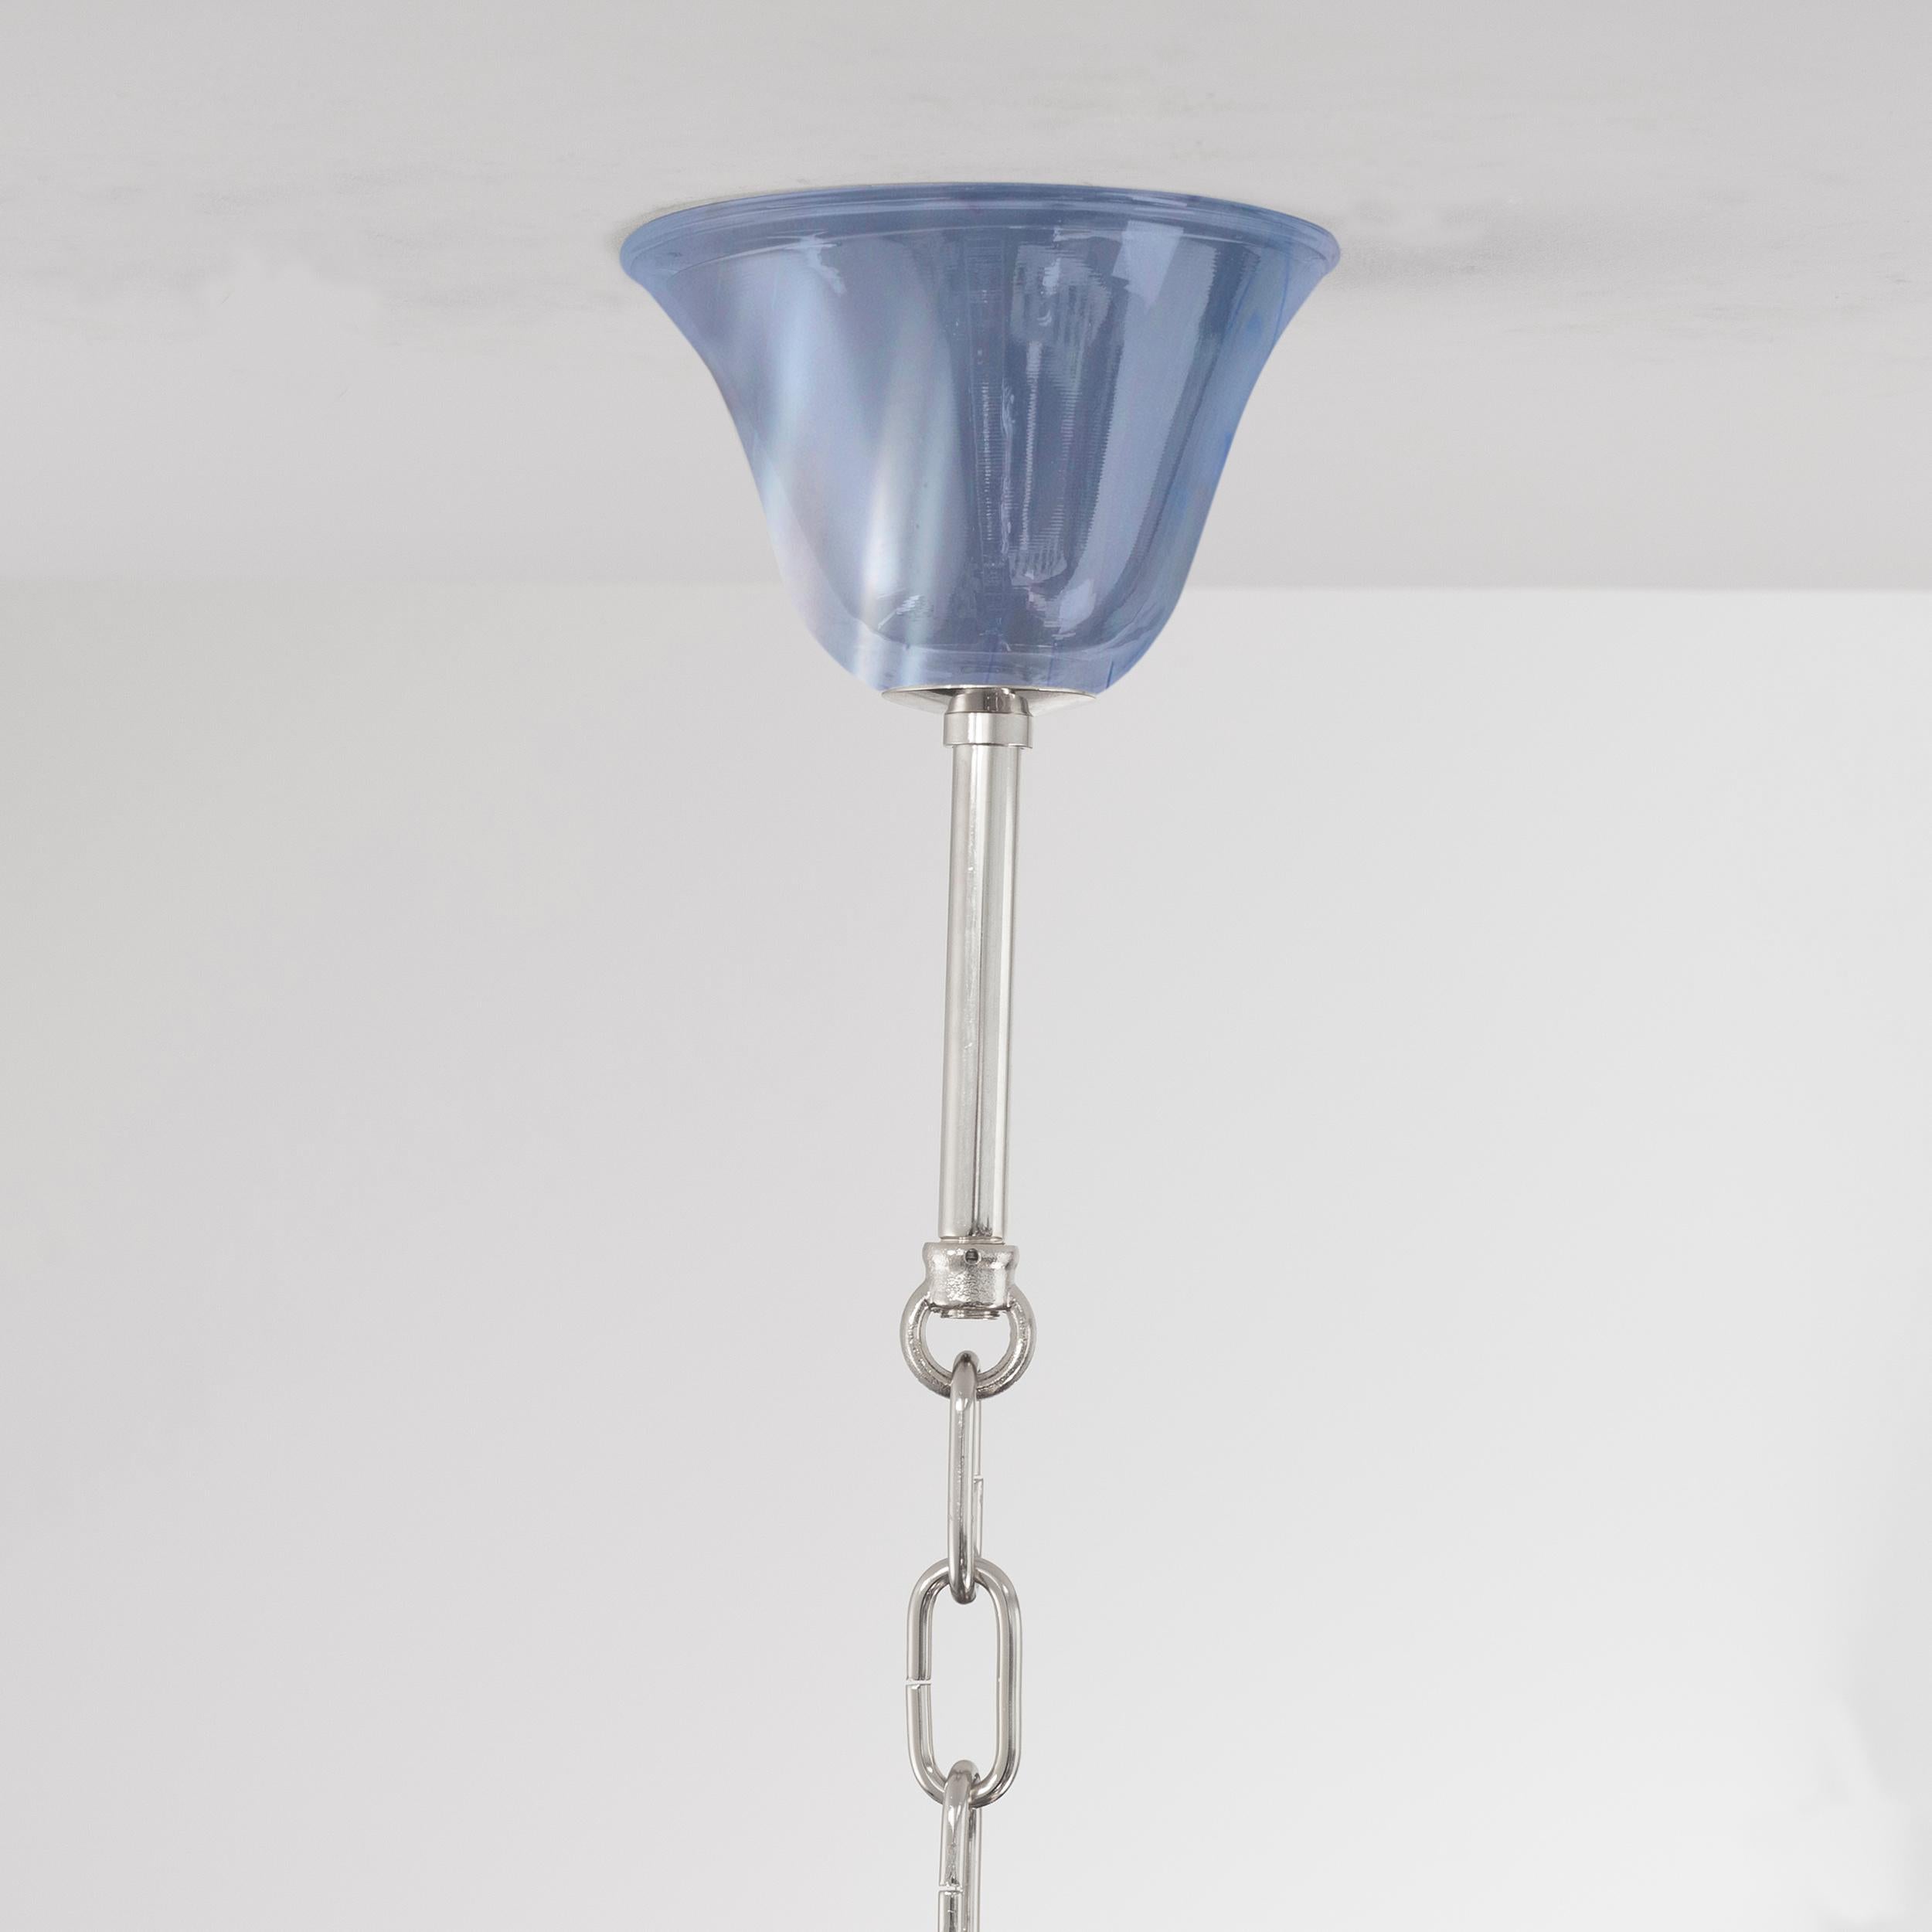 Blown Glass Capriccio Chandelier 5 Arms Blue Artistic Murano Glass by Multiforme For Sale